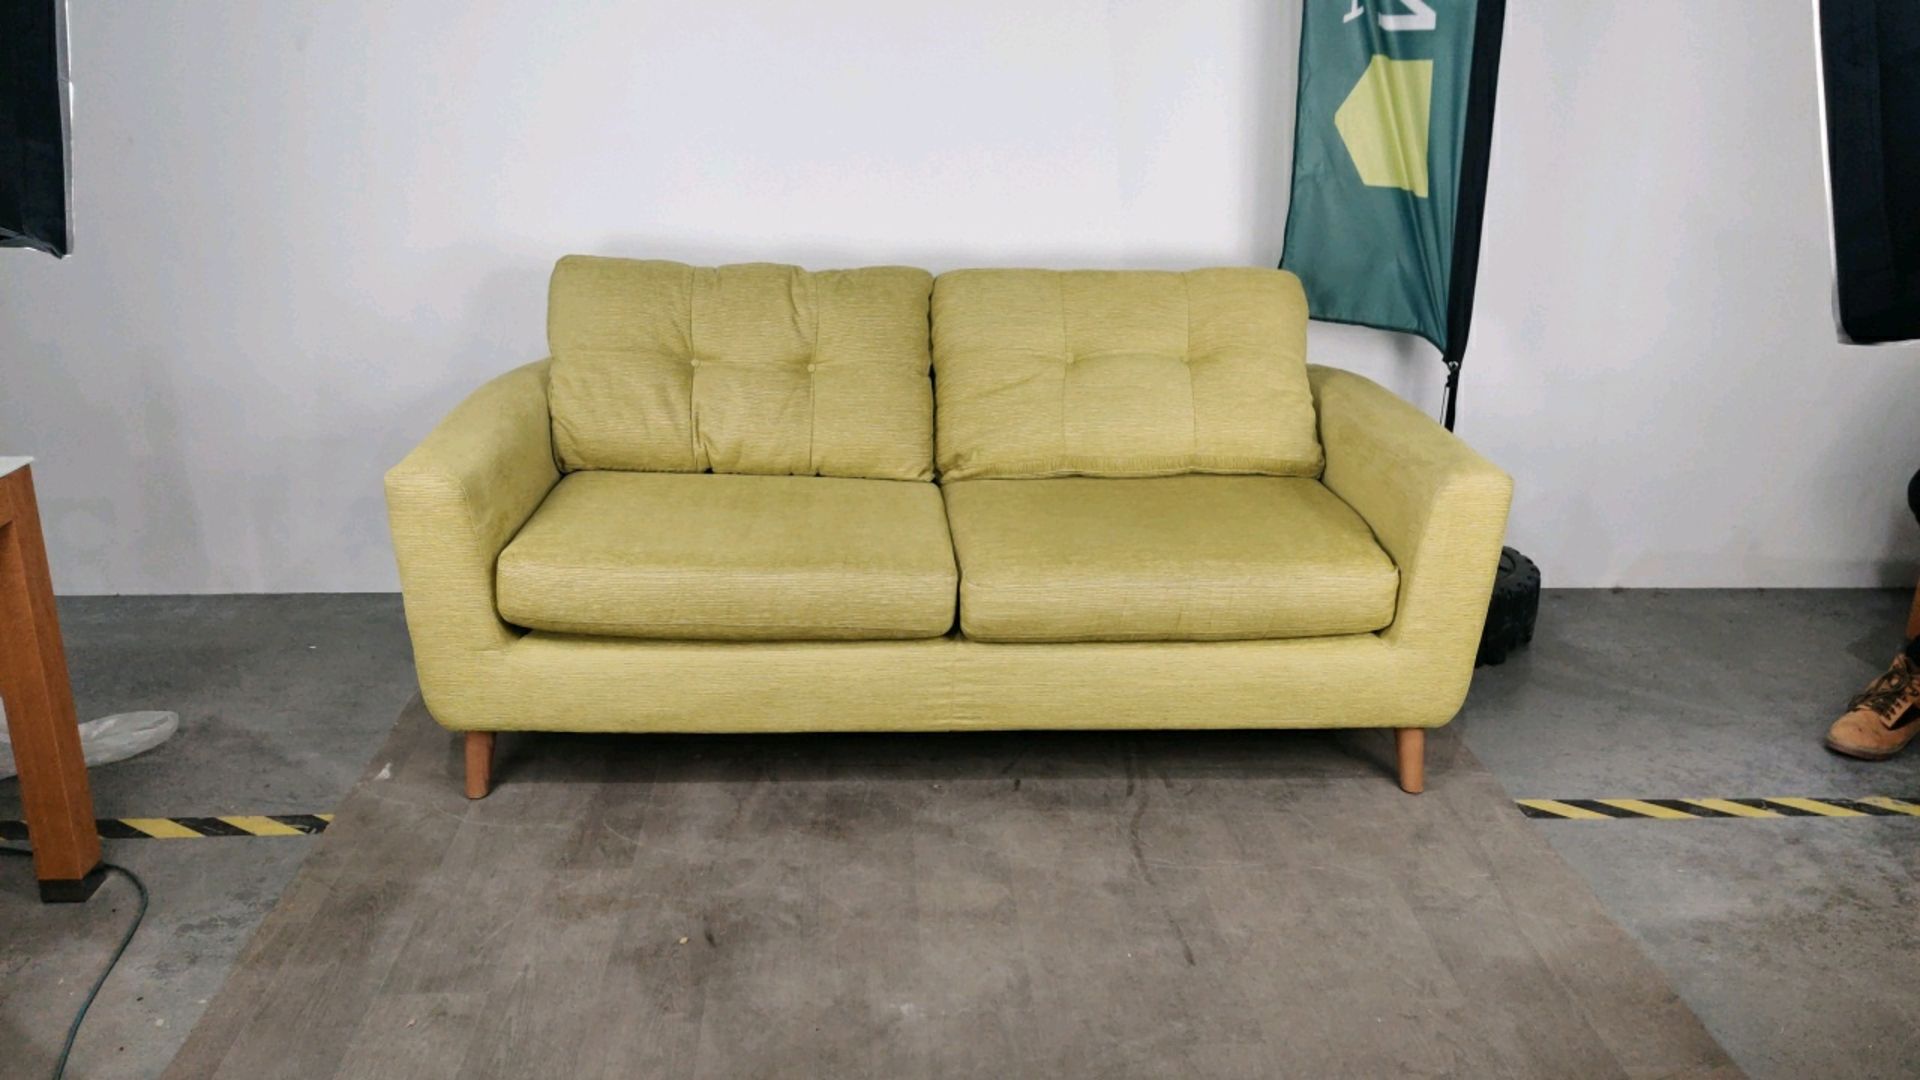 Two Seater Green Sofa - Image 2 of 2